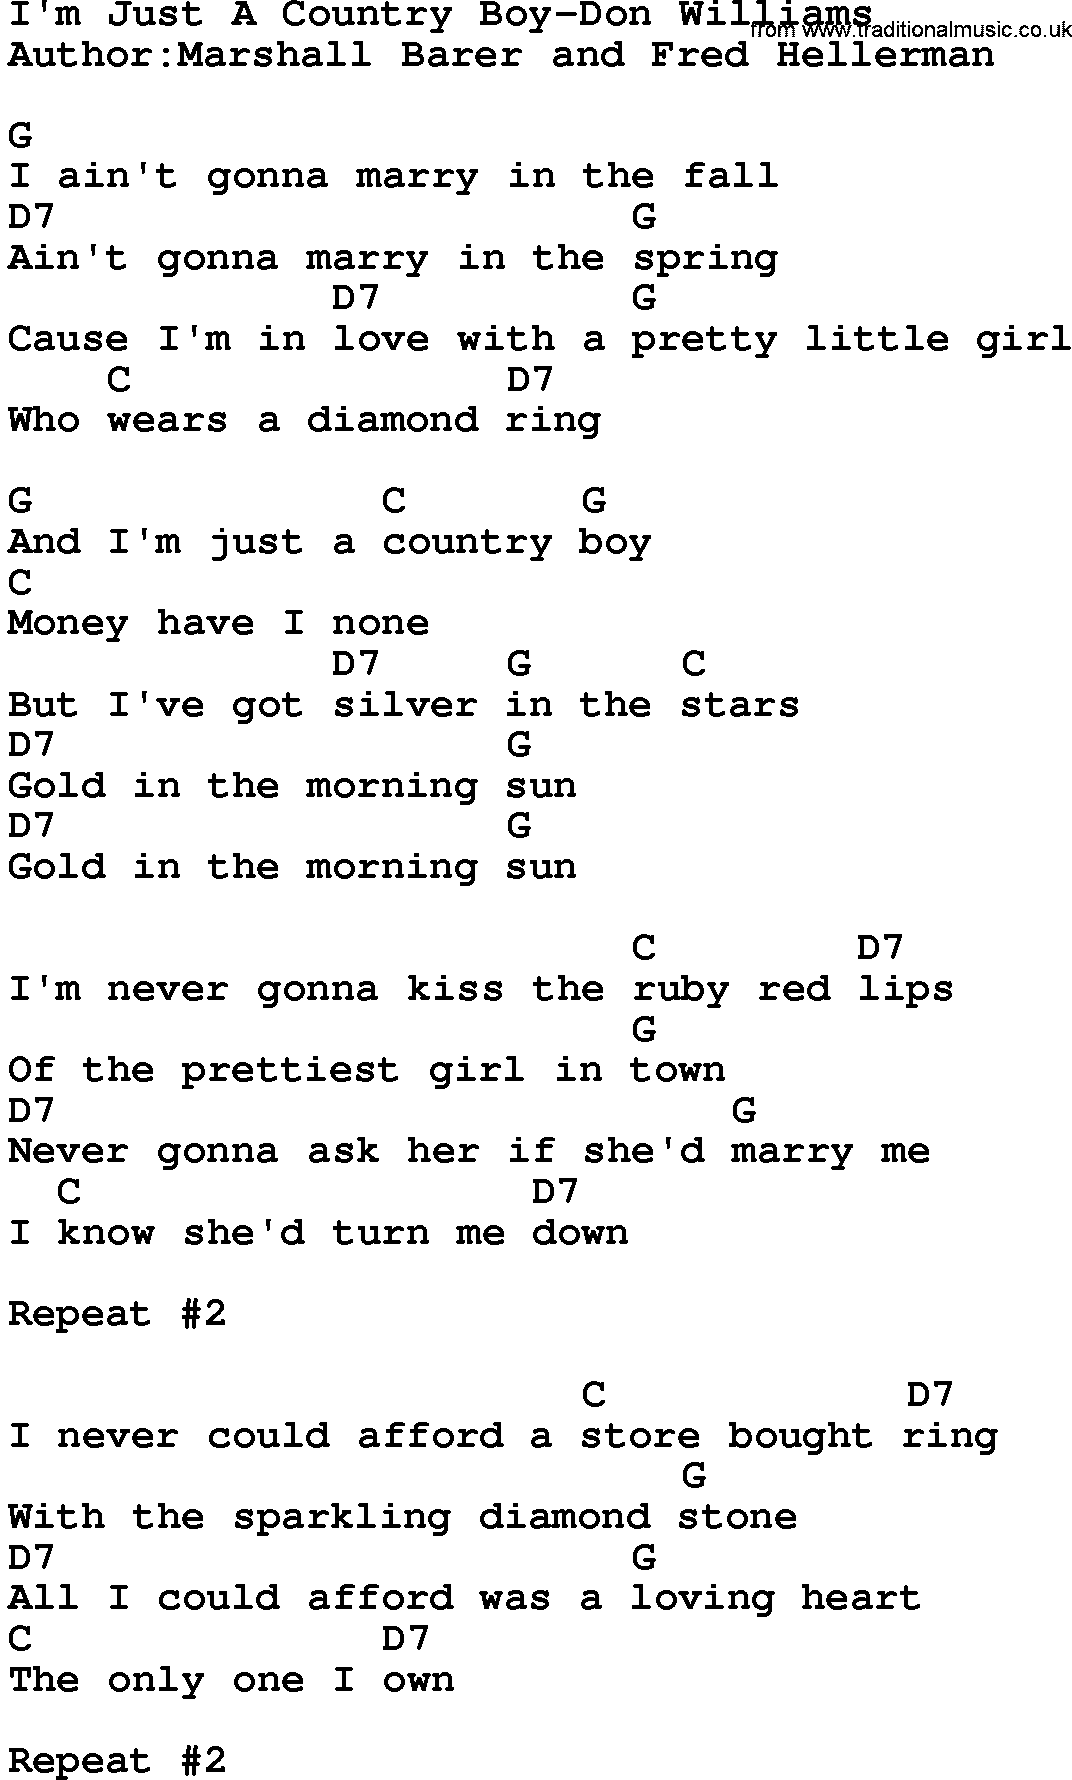 Country music song: I'm Just A Country Boy-Don Williams lyrics and chords